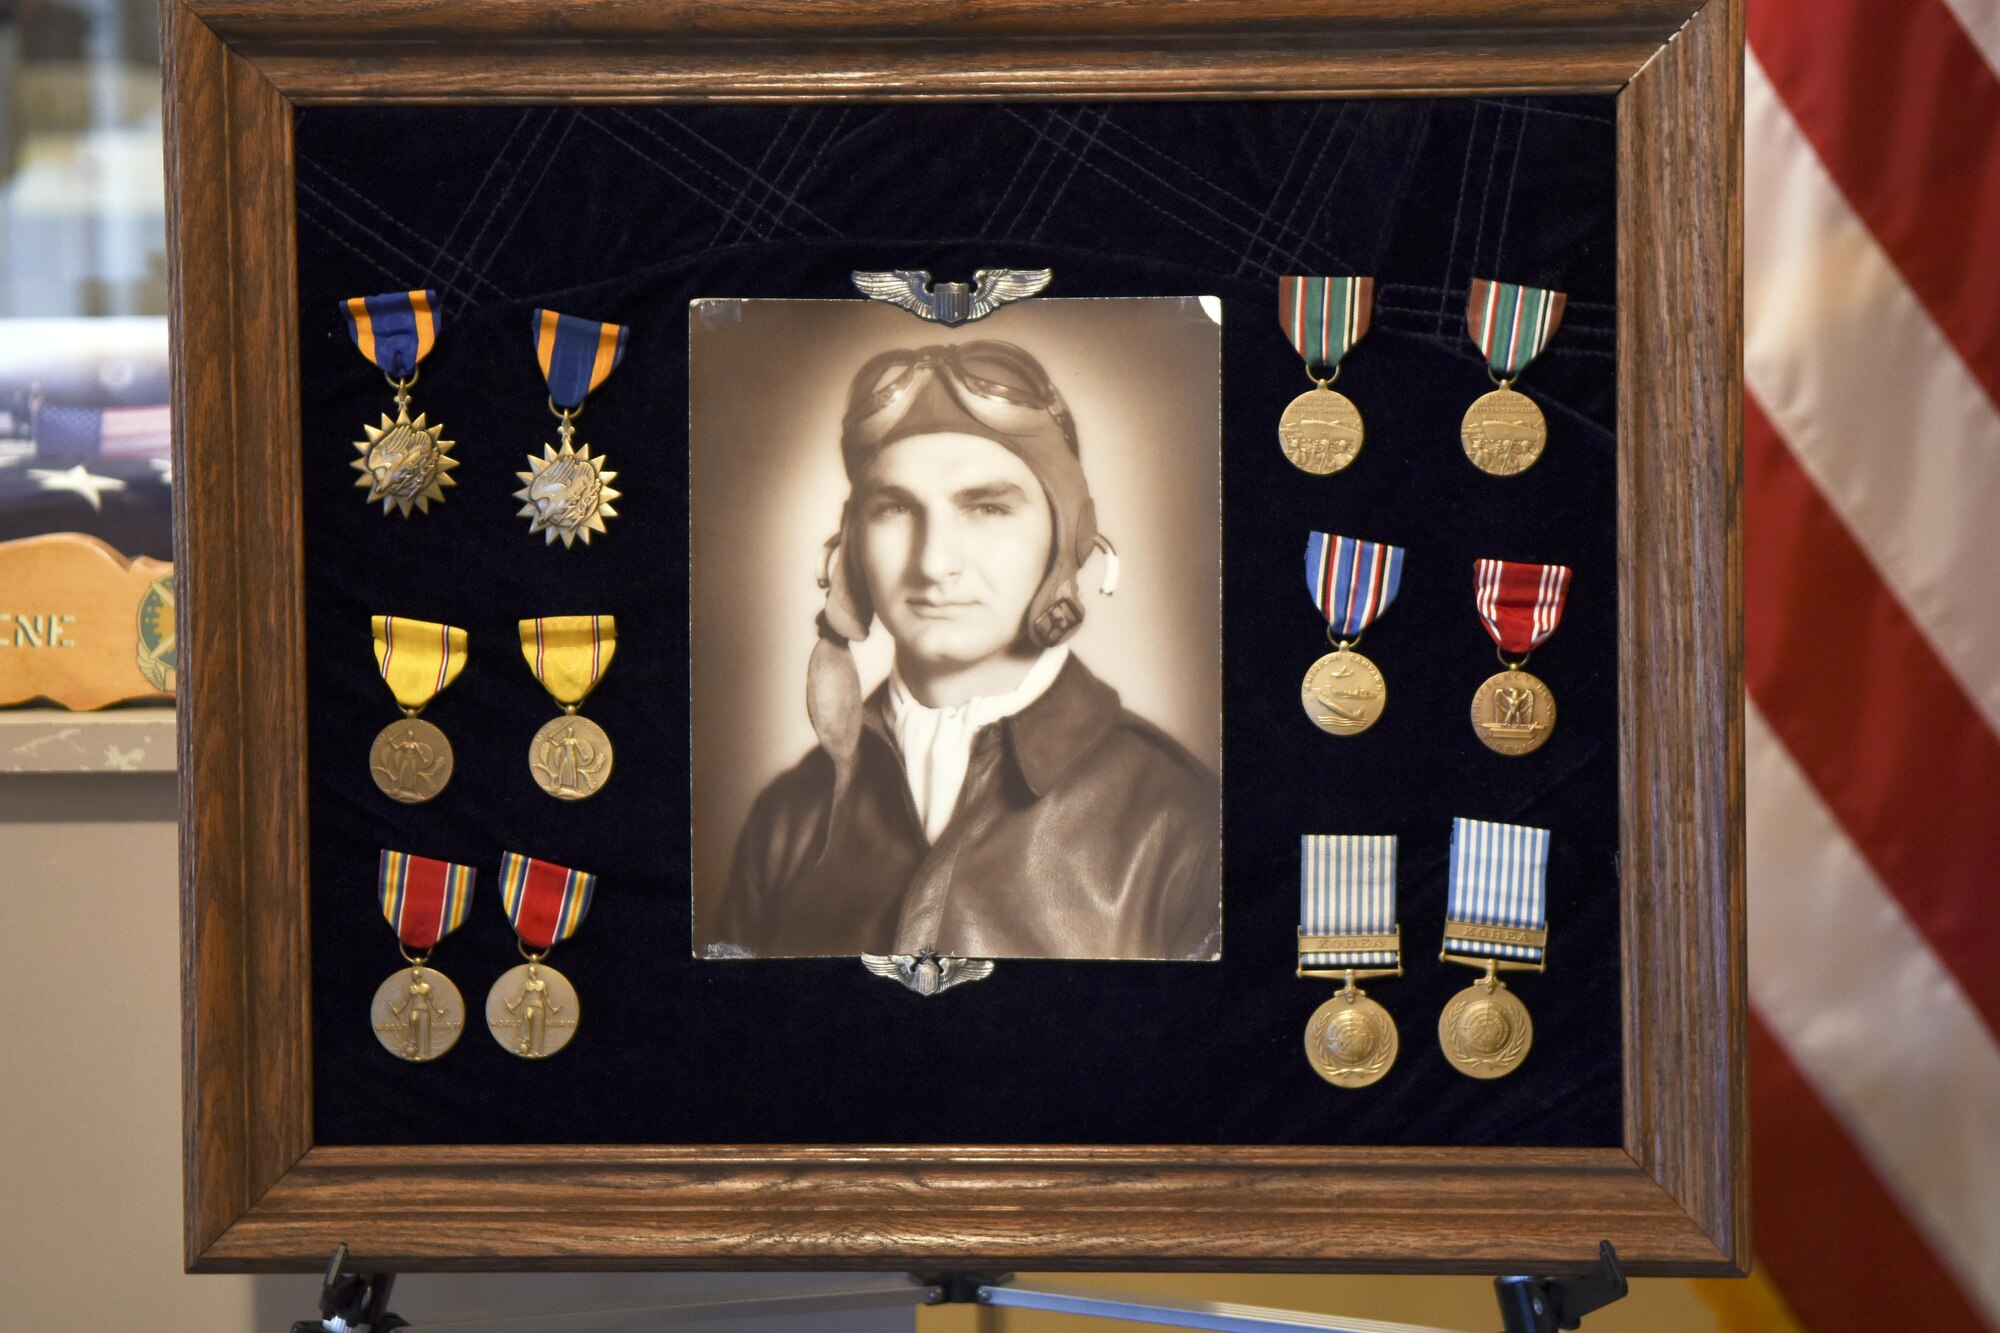 Capt. Stanley Scott Sr., U.S. Army Air Corps pilot, was awarded the POW medal posthumously by U.S. Sen. John Cornyn, R-TX, at the Dyess Museum, April 18, 2017. He was killed in action in Korea, March 6, 1952. Since he was killed in action, the Air Force had been unable to locate discharge papers as documentation for the POW medal. Cornyn’s office collected proper documentation of Scott’s service and work from his son and sent it to the Air Force to secure the medal. Scott Sr. was also awarded the Air Medal with one oak leaf cluster, the European Theater Ribbon with three clusters, the pre-Pearl Harbor ribbon with one star, the American Defense Medal, the Good Conduct Medal and the Korean Service Medal. (U.S. Air Force photo by Senior Airman Kedesha Pennant)

